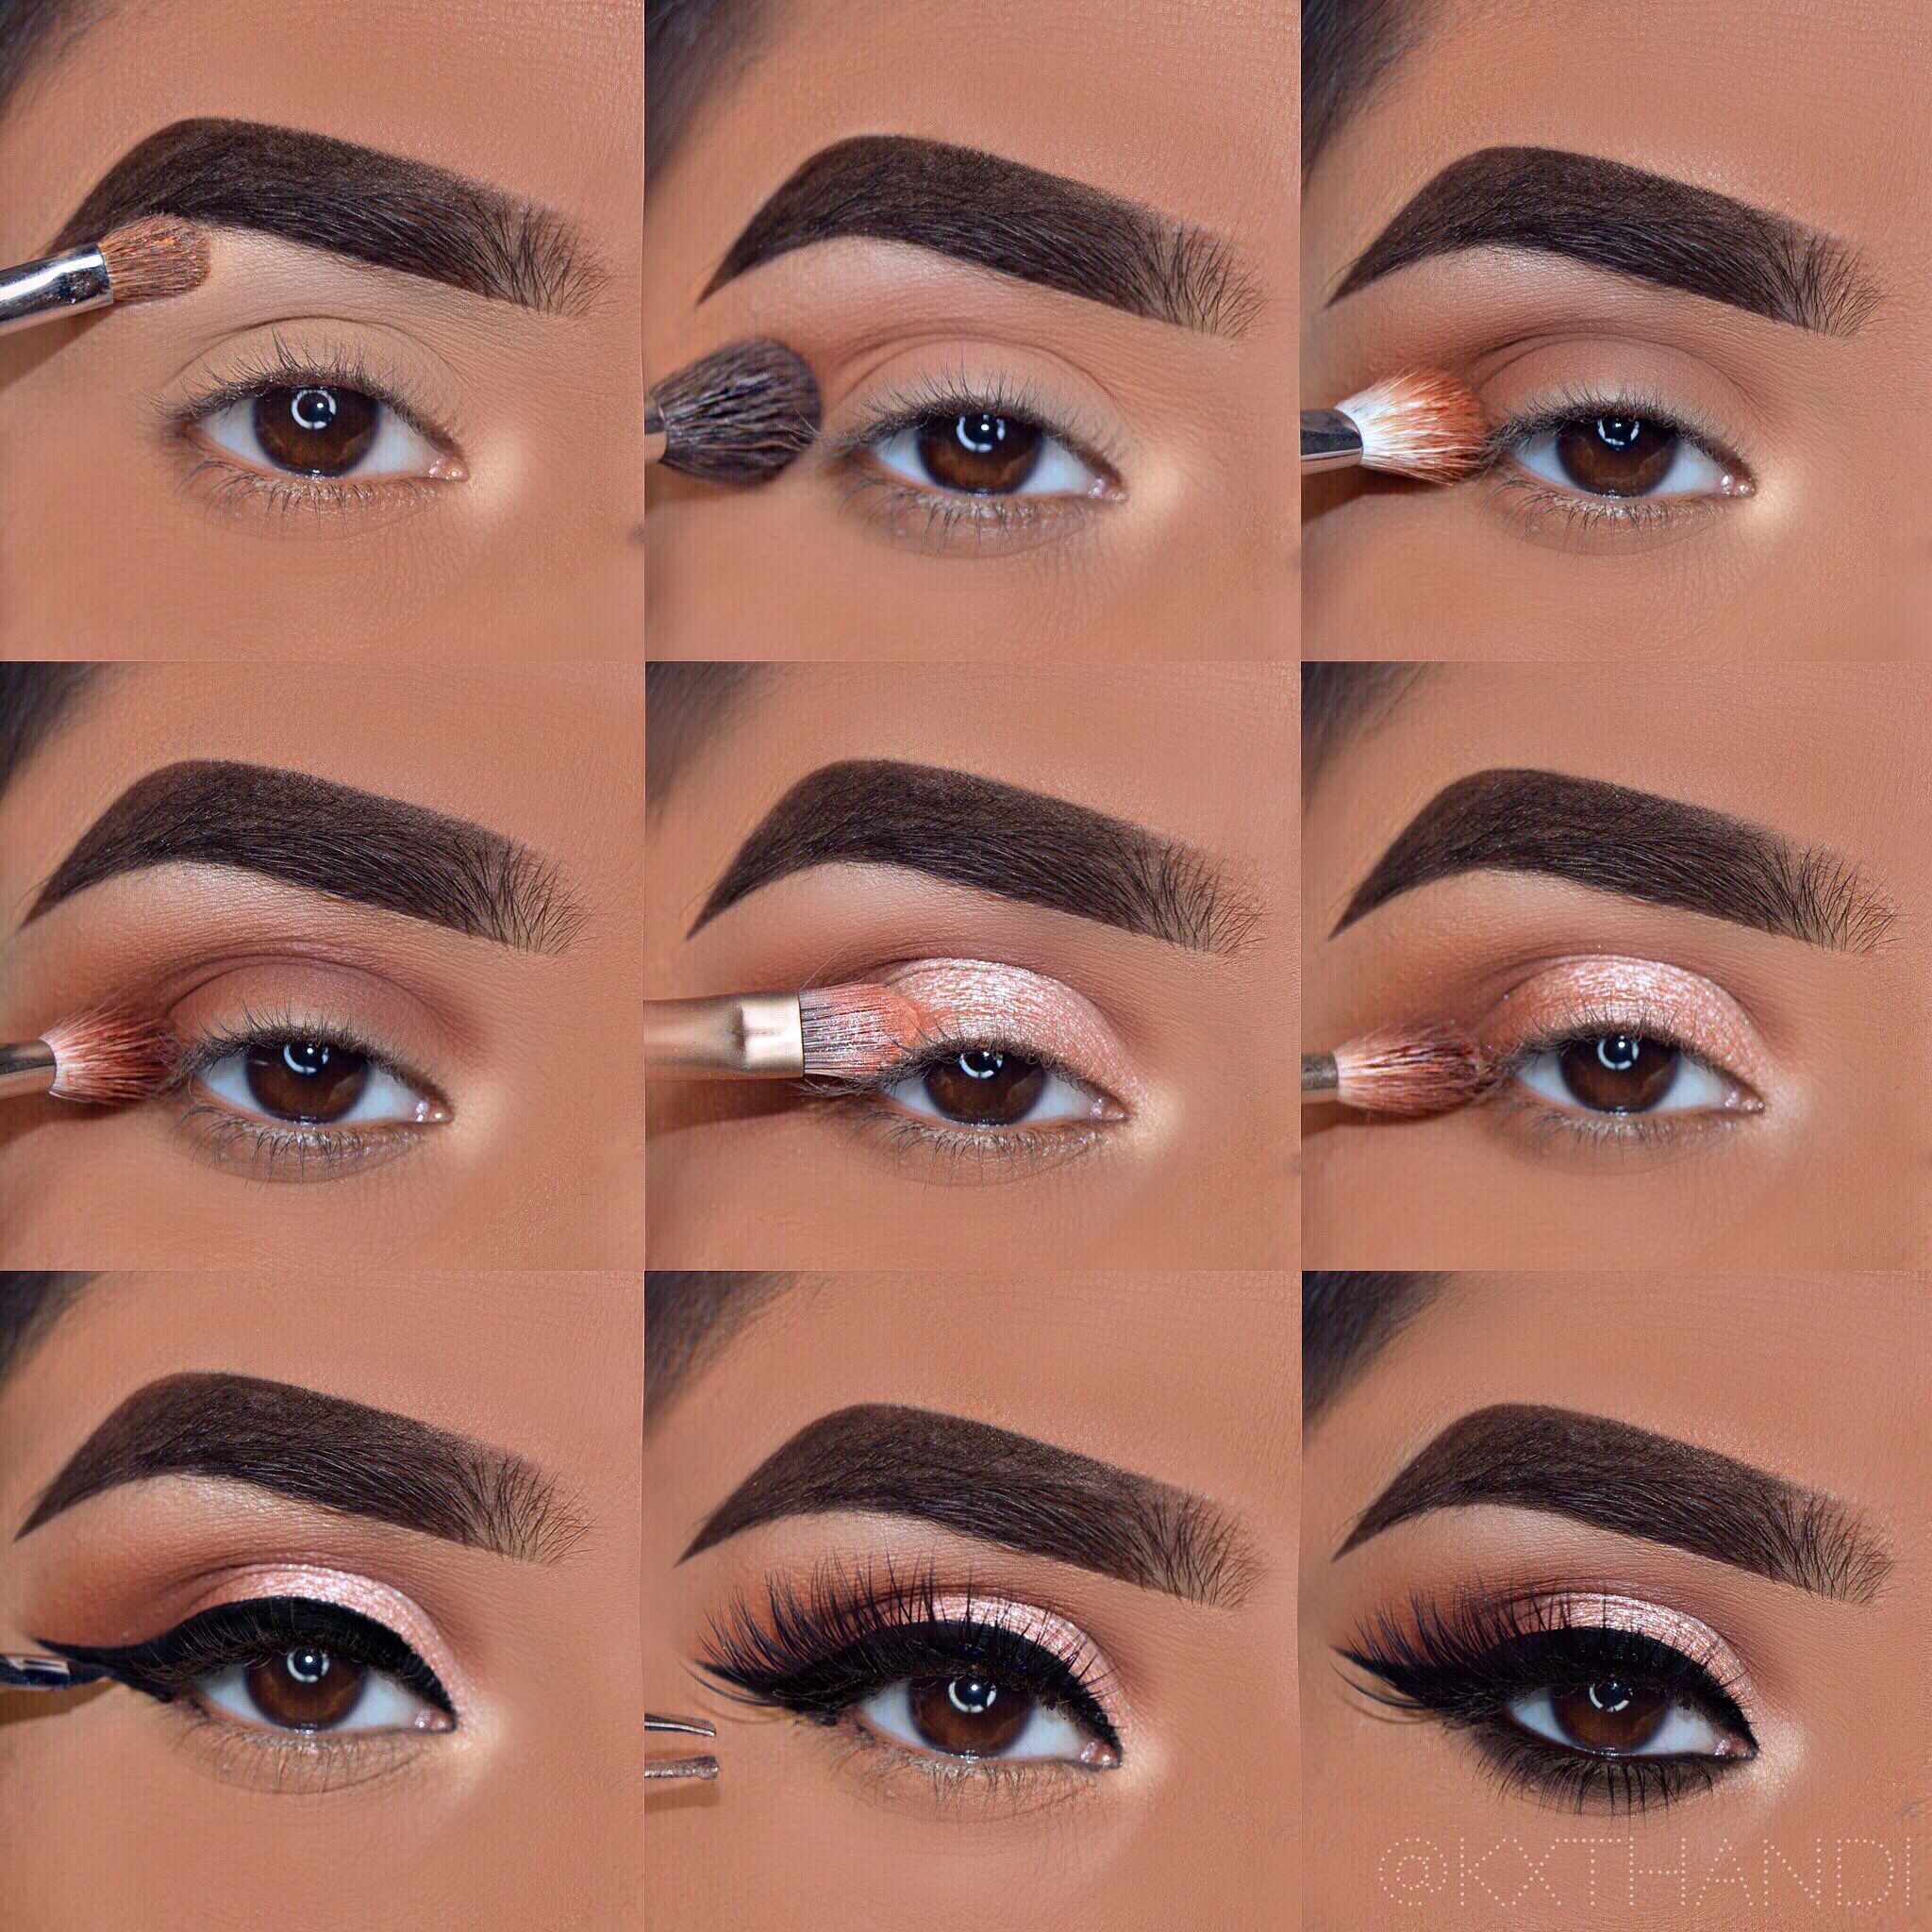 11 makeup Glam step by step ideas